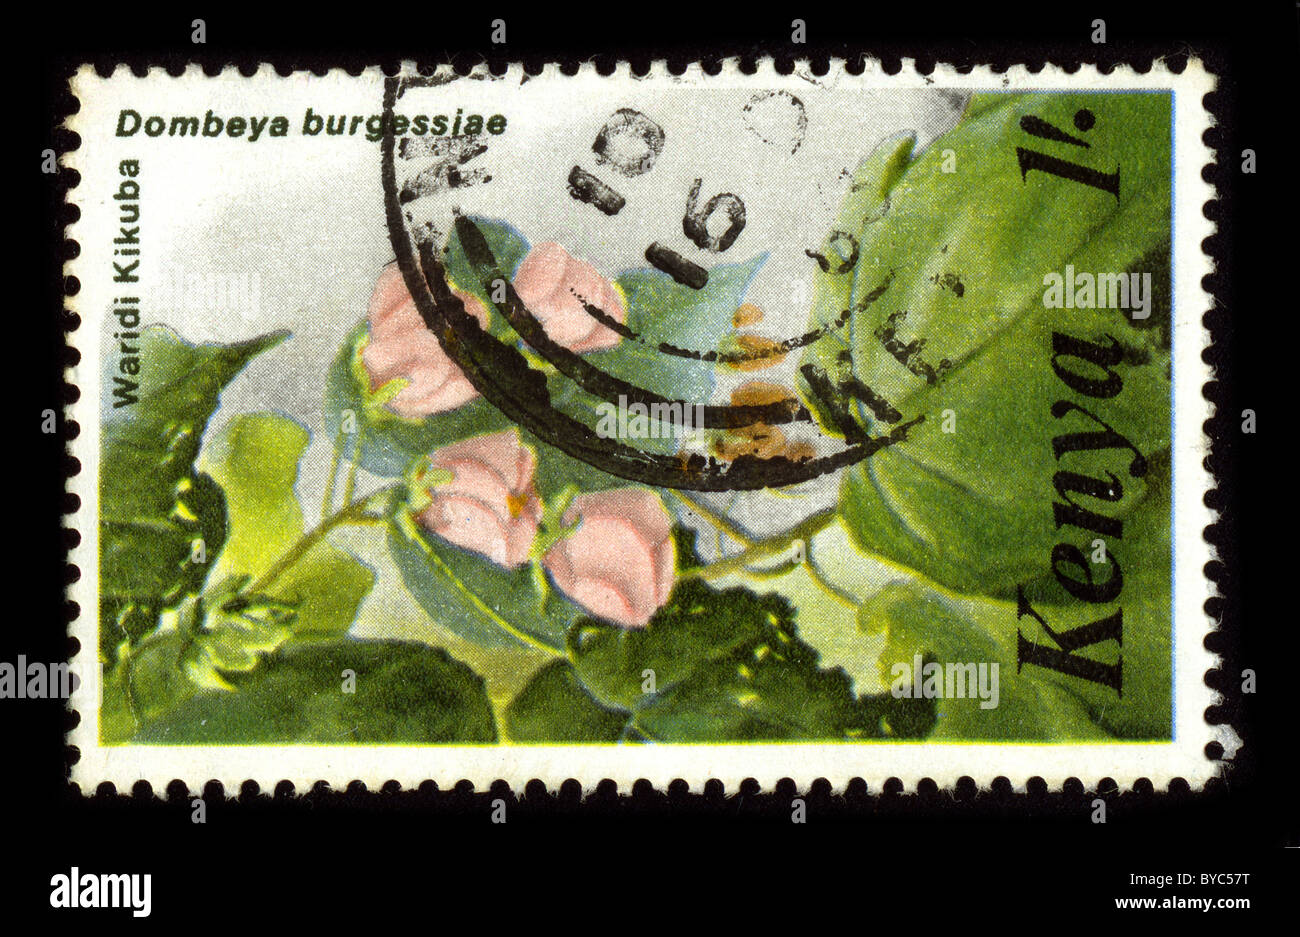 KENYA-CIRCA 1980:A stamp printed in KENYA shows image of the Dombeya acutangula is a plant species belonging to the family Malvaceae. It is native to Africa, circa 1980. Stock Photo